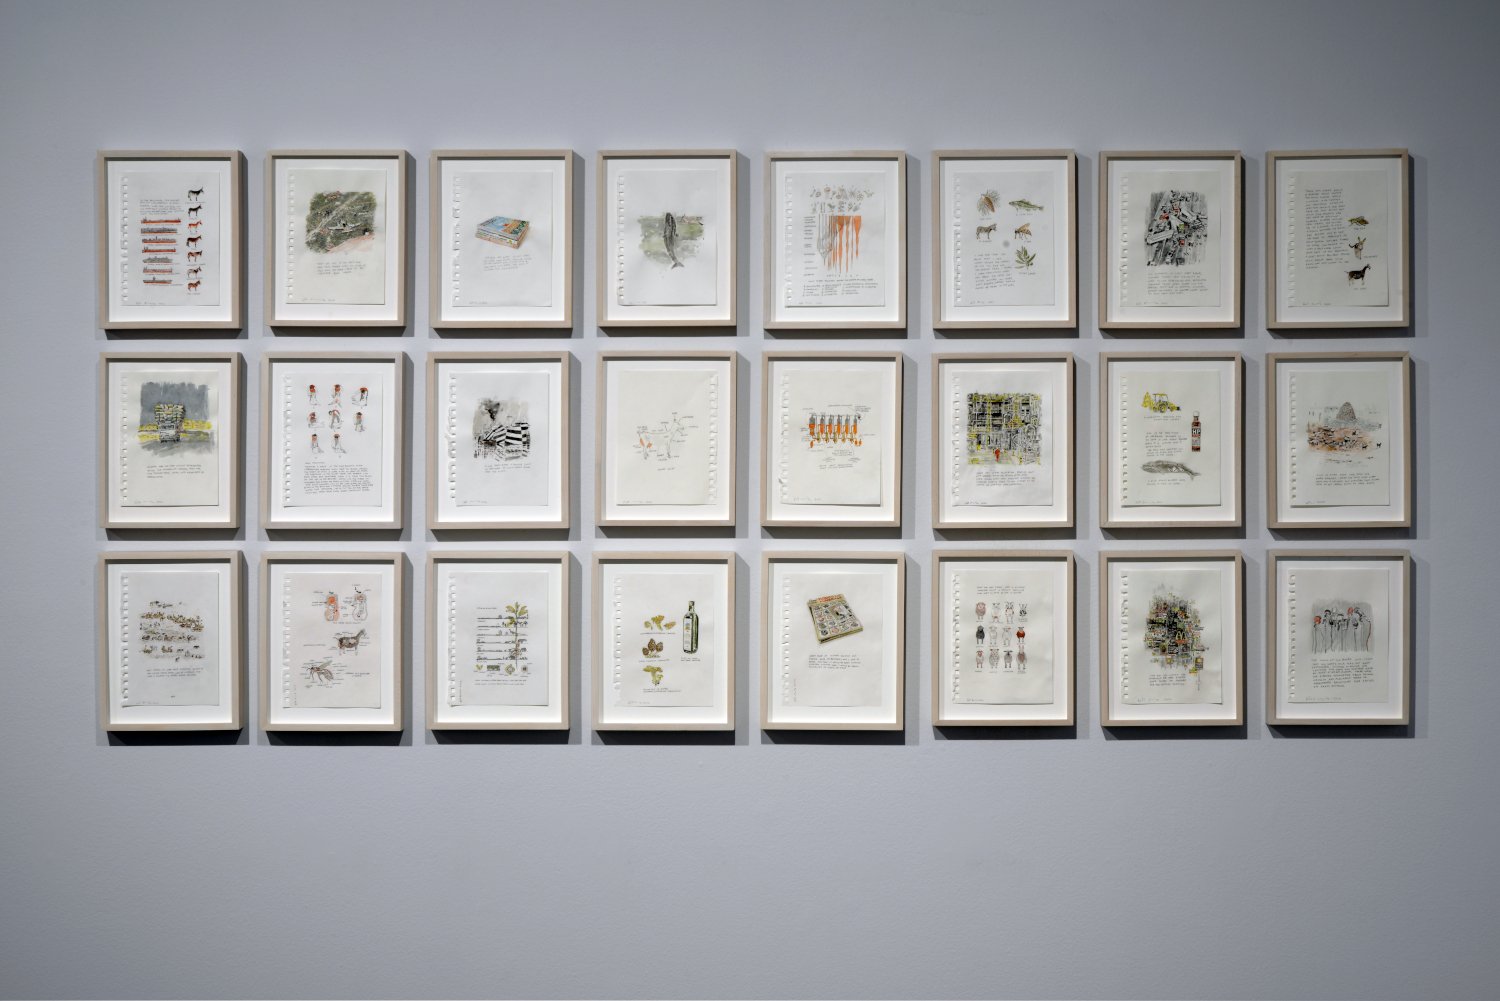  Small sized watercolour and pencil drawings on paper, 2018-2020. 